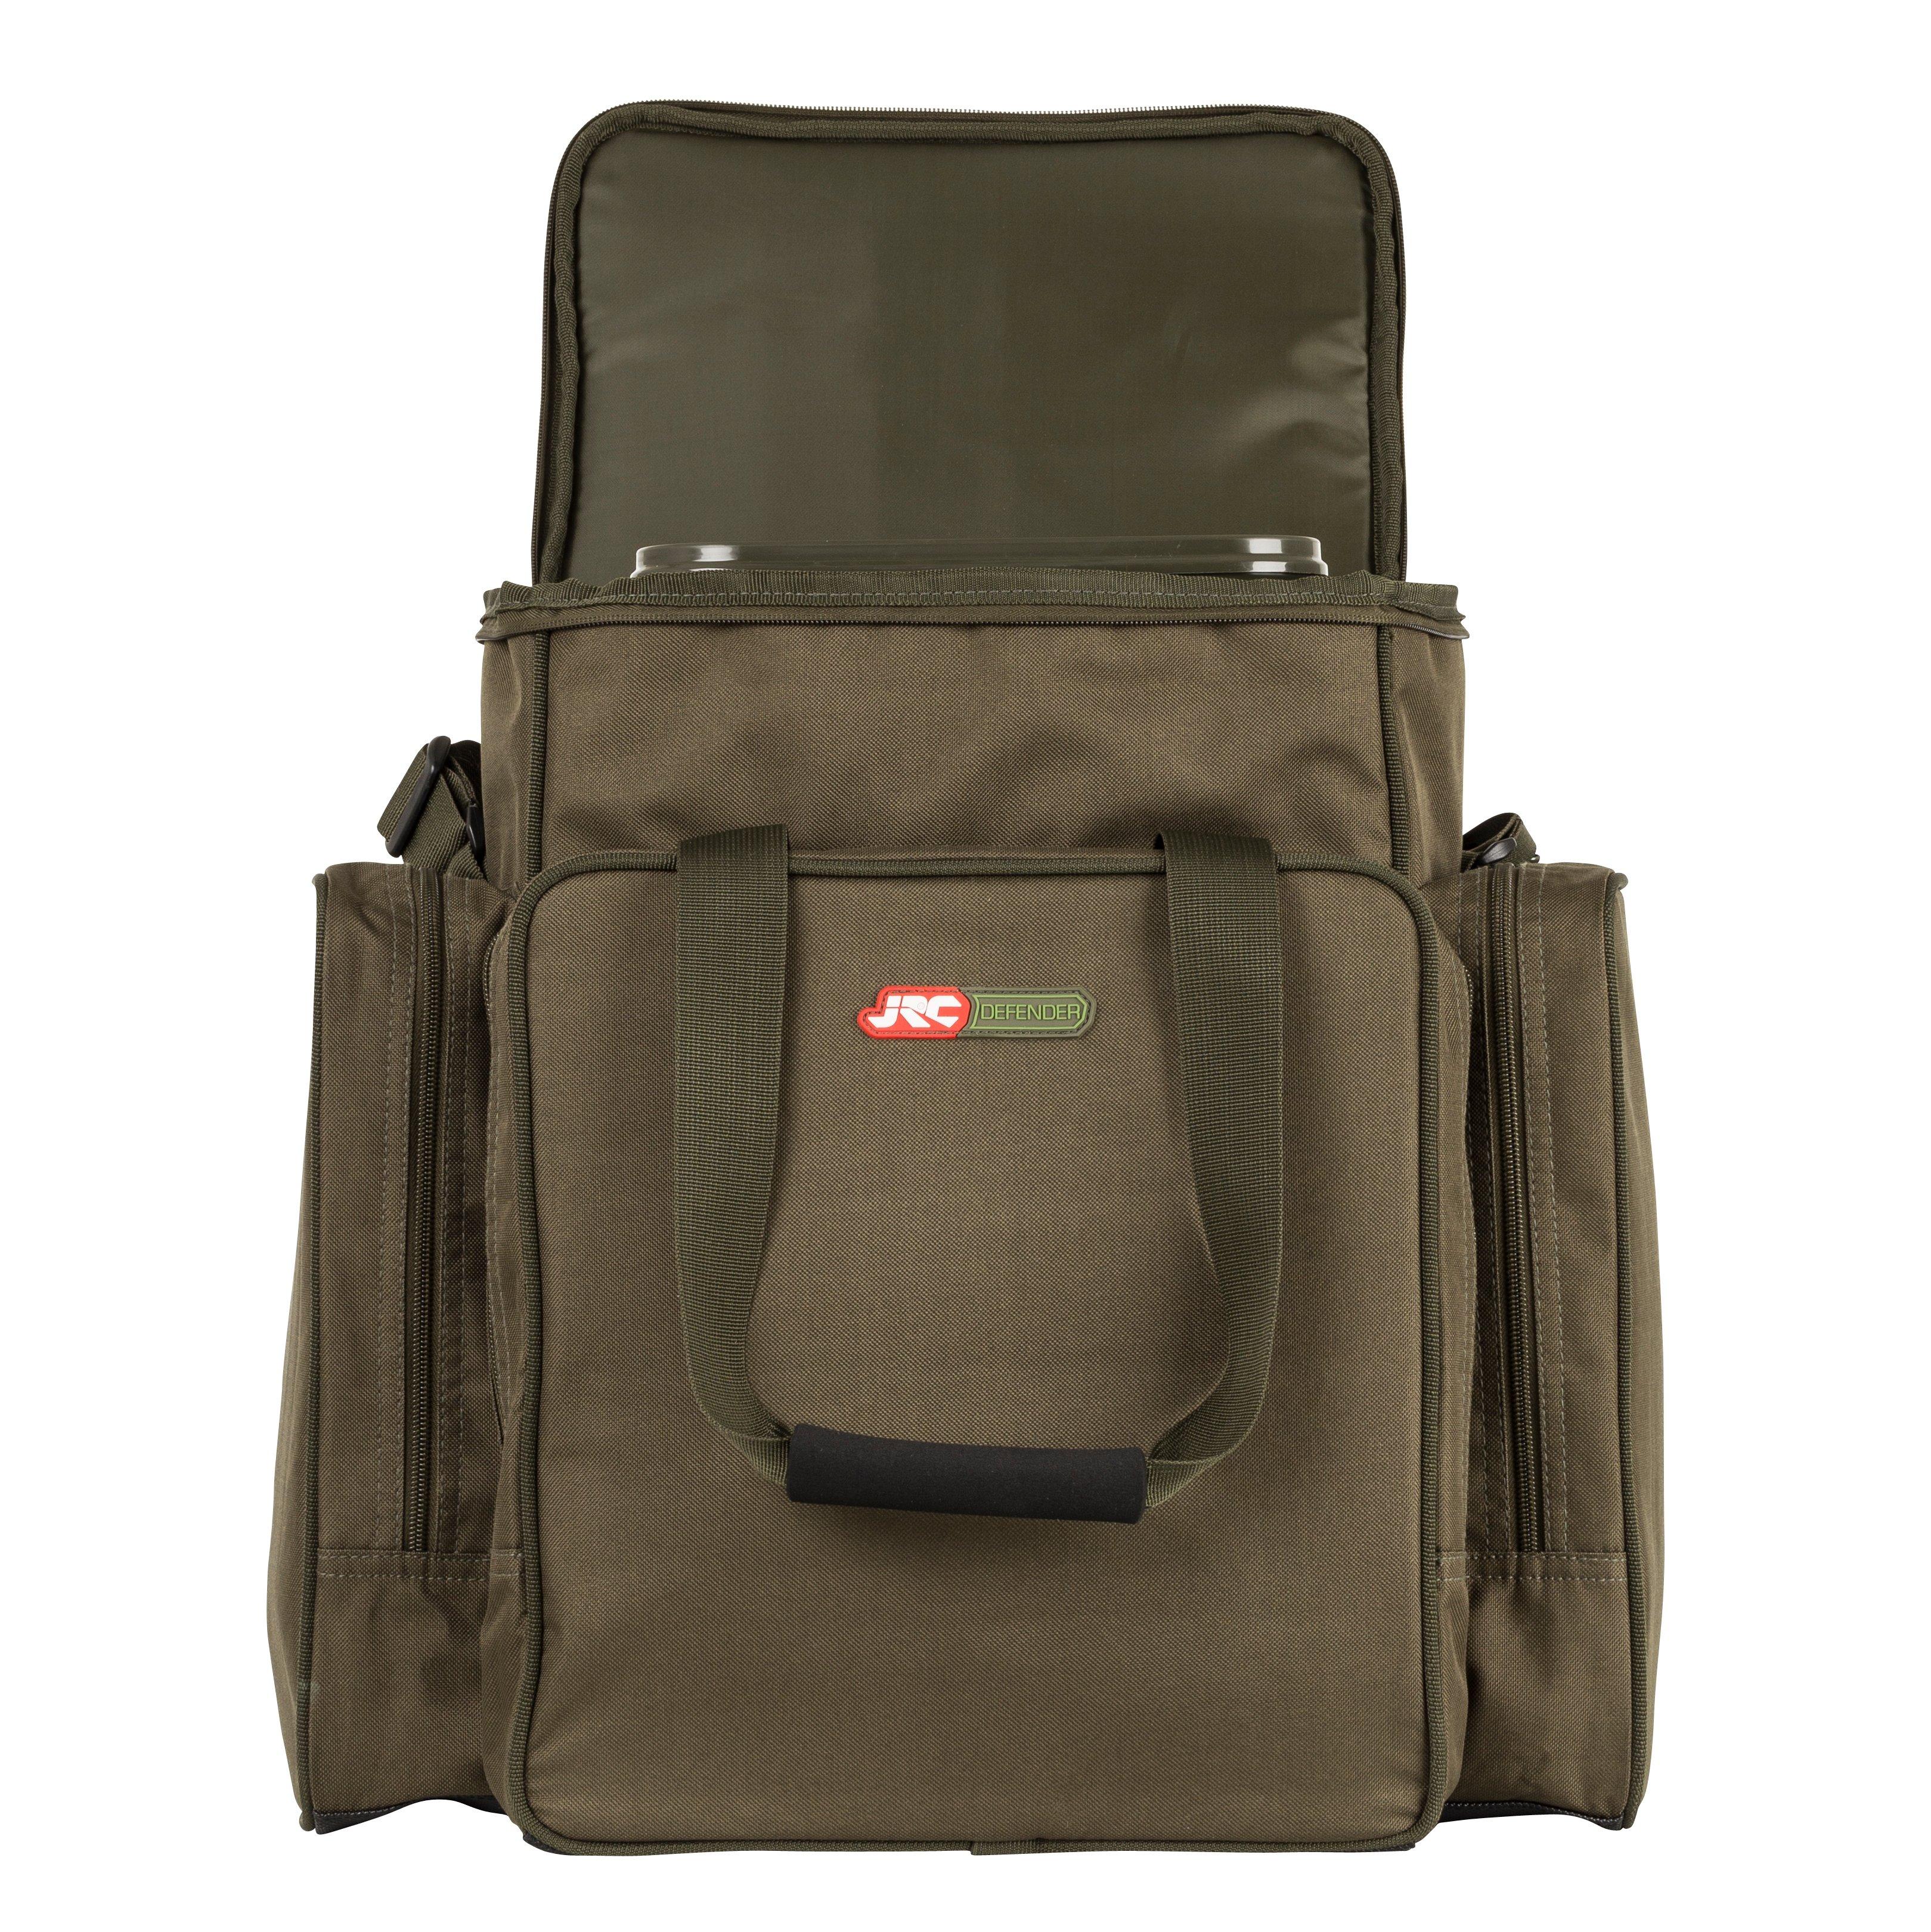 JRC Defender Carryall ALL SIZES Carp fishing tackle 